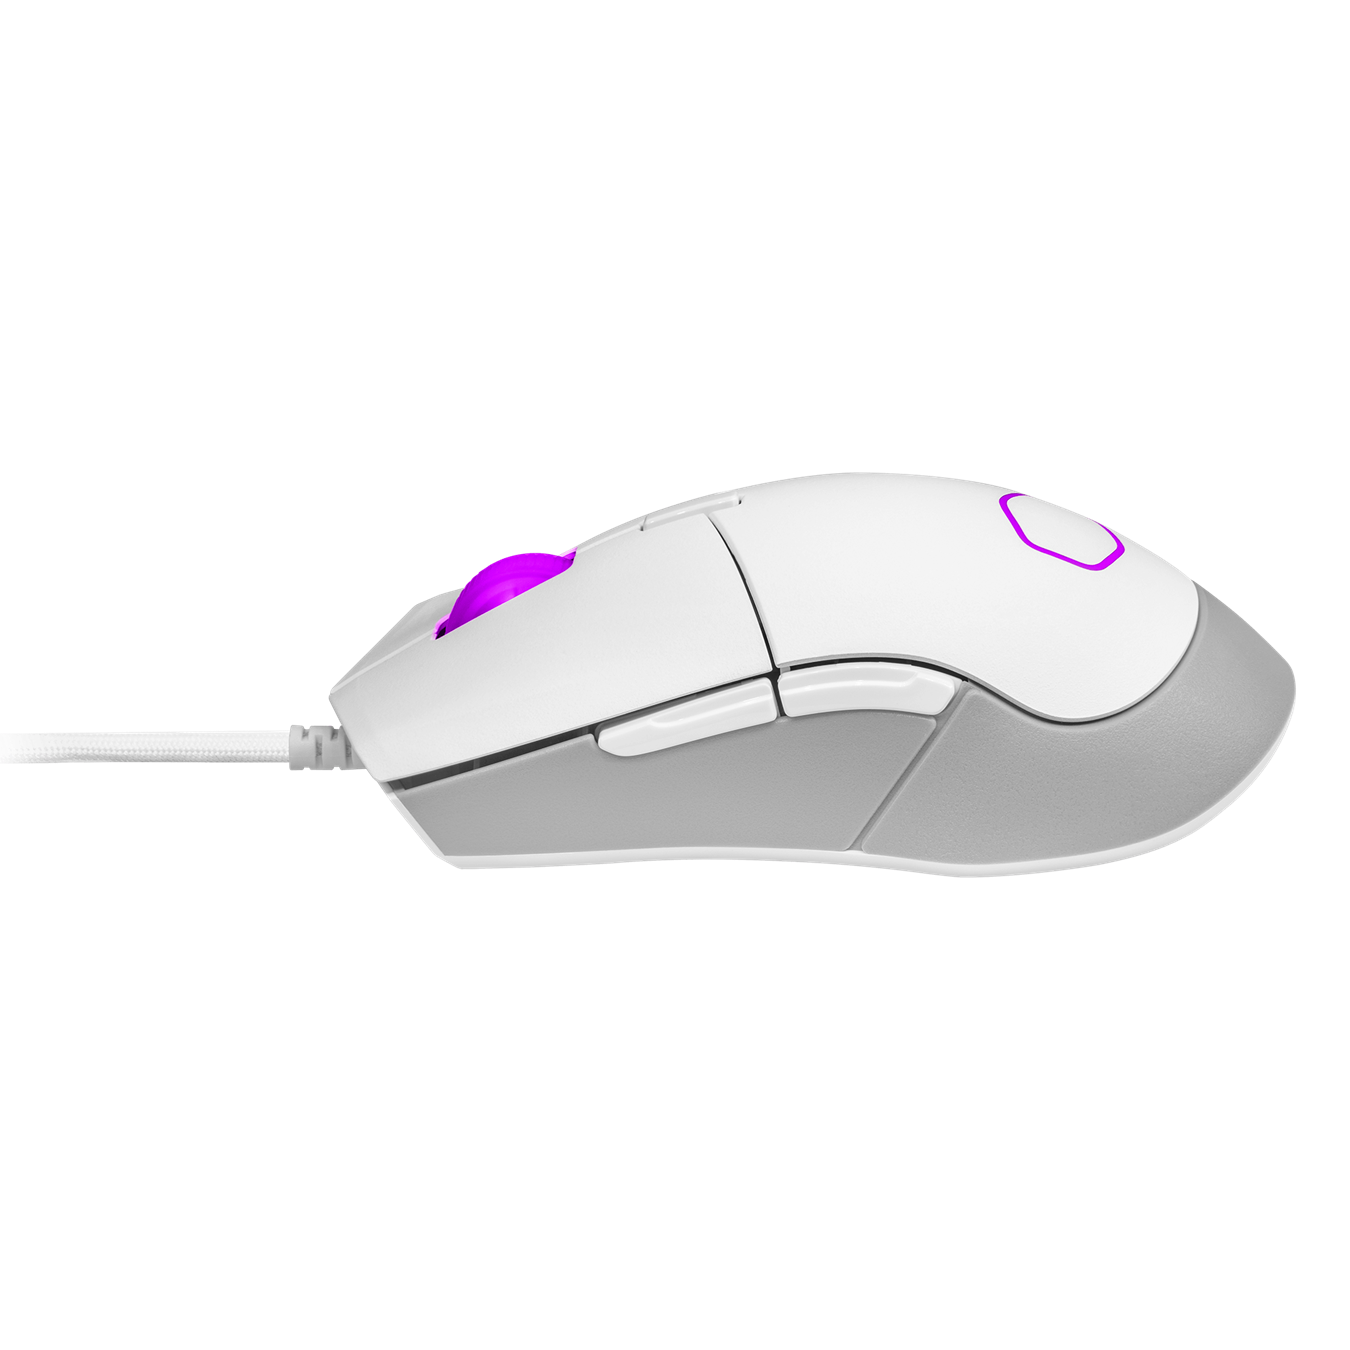 MM310 White Edition Gaming Mouse - New-and-improved feet made with PTFE material for low friction and high durability, which provides a smooth, fast glide with maximum responsiveness